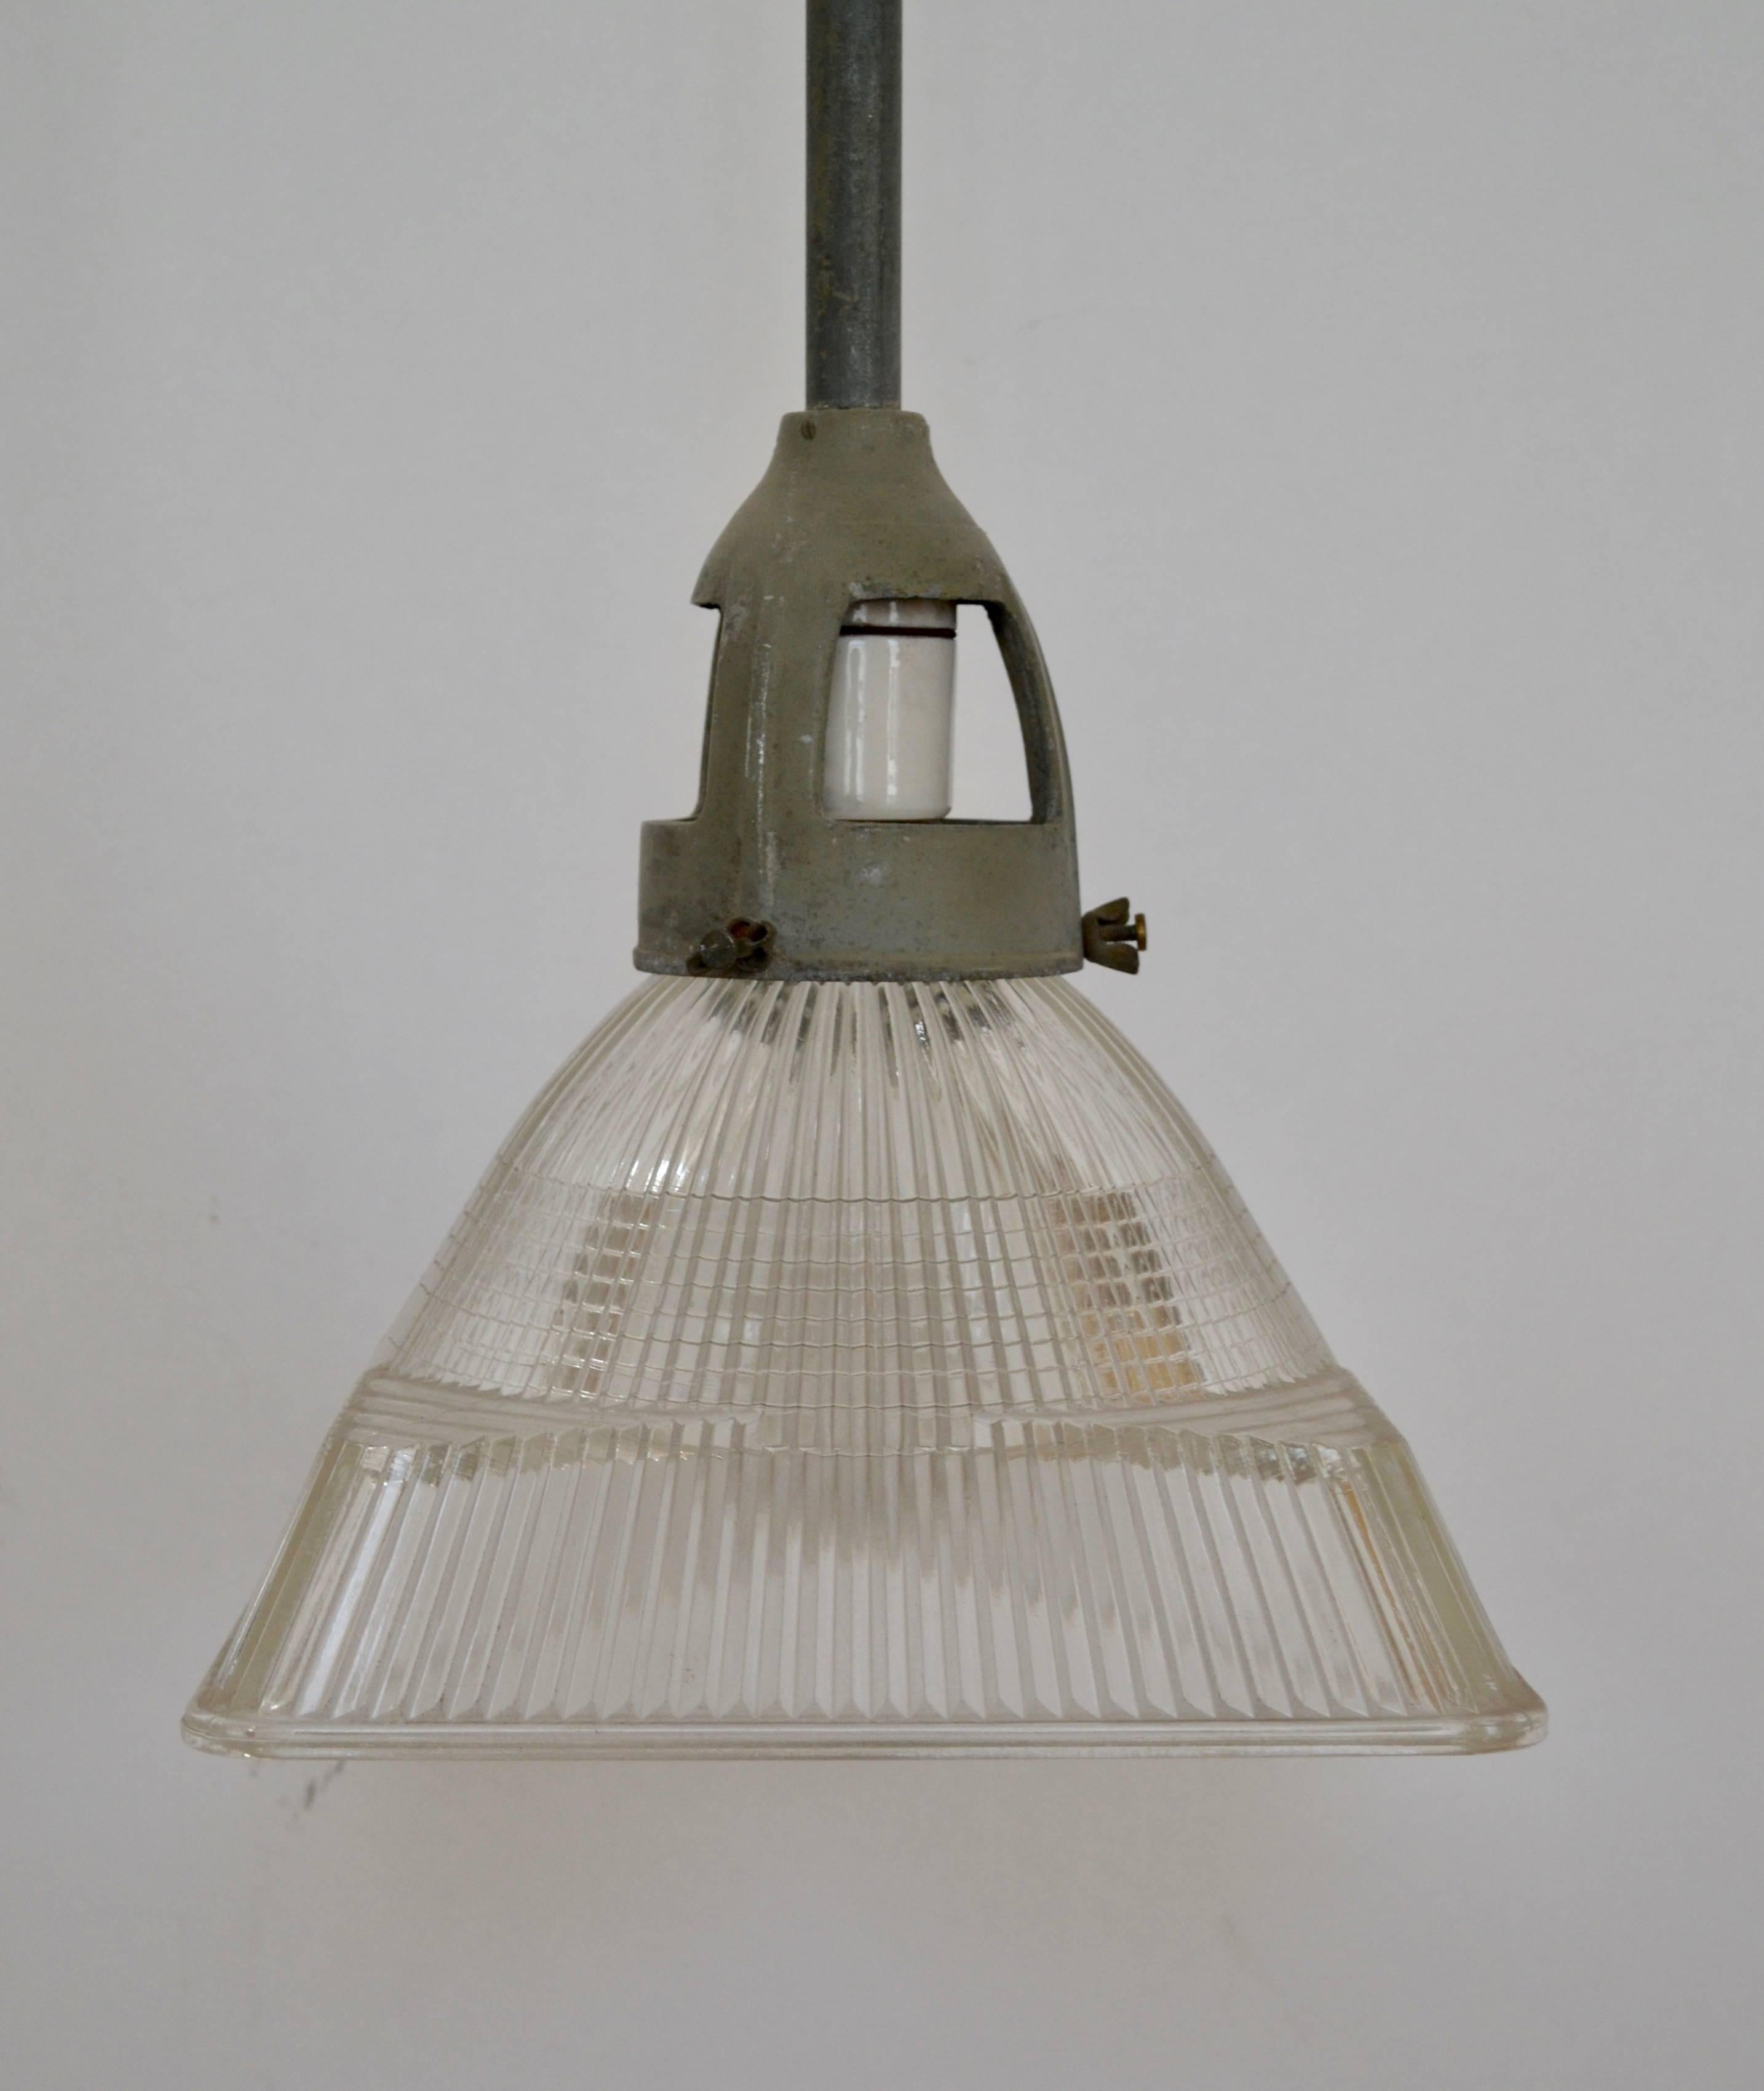 Rare square prismatic Holophane shade complete with original hanging hardware including cast aluminium ventilated collar, RMC stem and ball-swivel canopy. Shade secured to collar via three winged thumb screws and illuminated by single porcelain